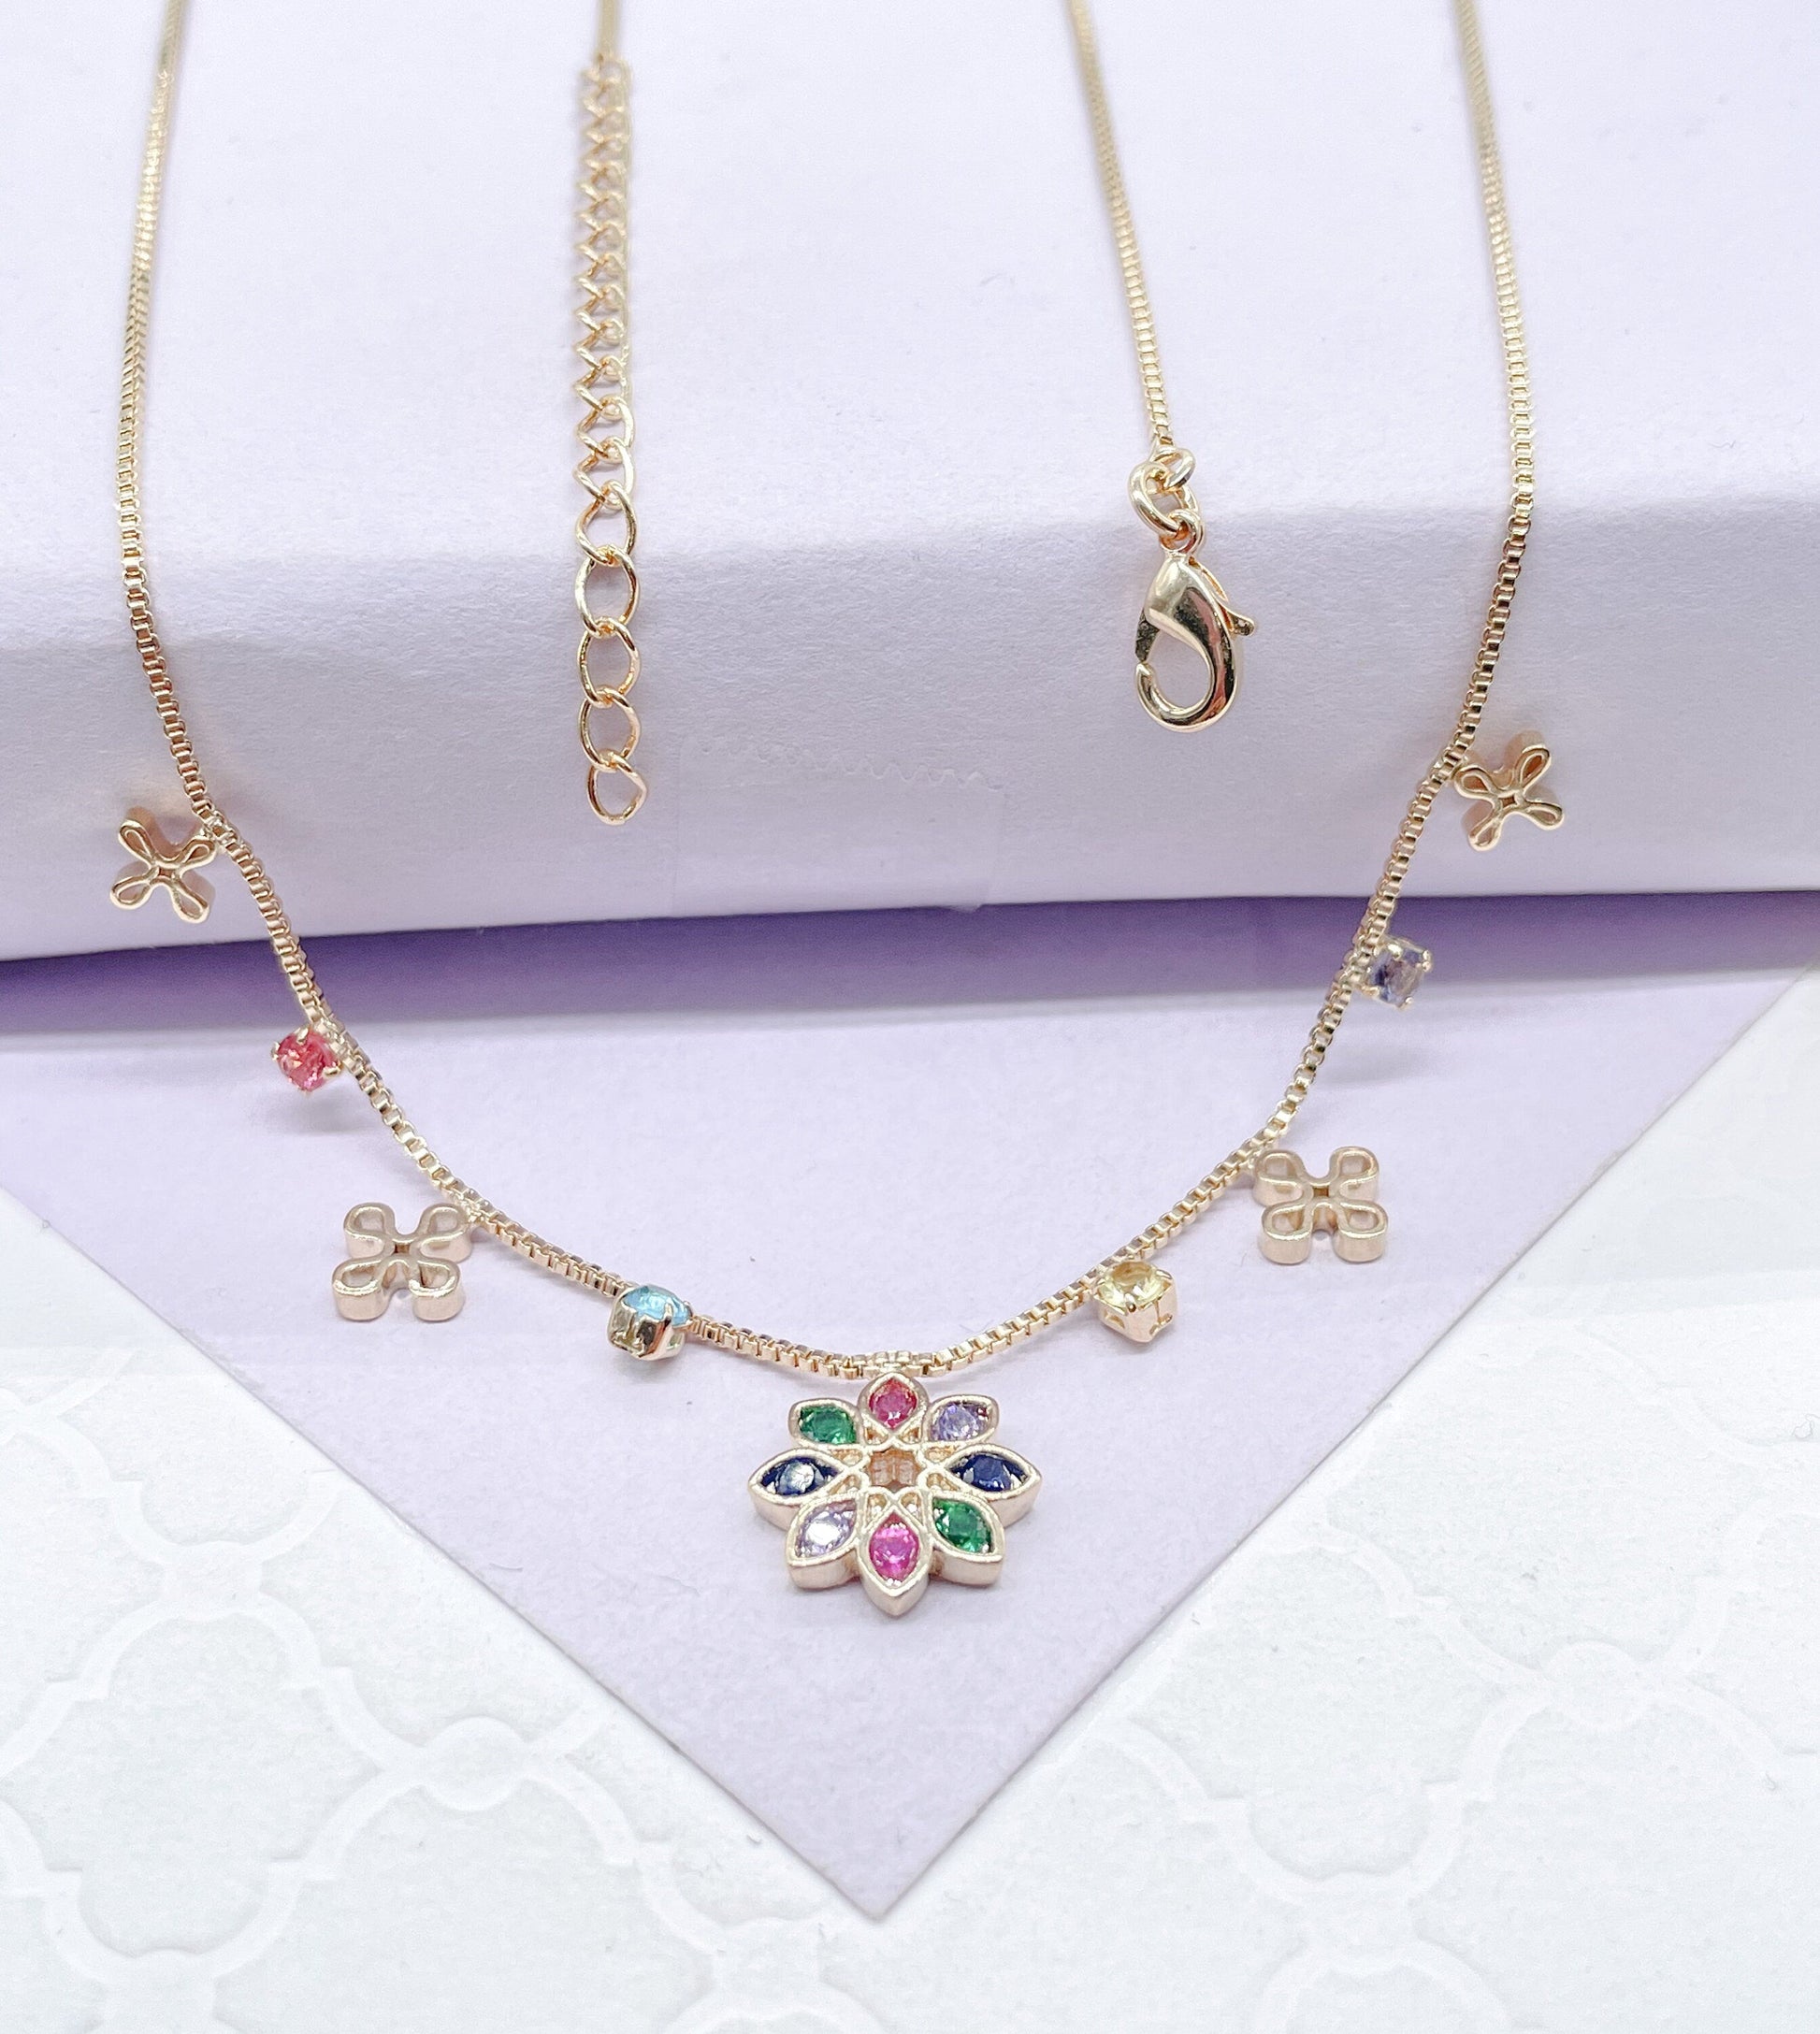 18k Gold Filled Dainty Box Chain Choker with Colorful Cz and Flower Charms w Flower Centerpiece